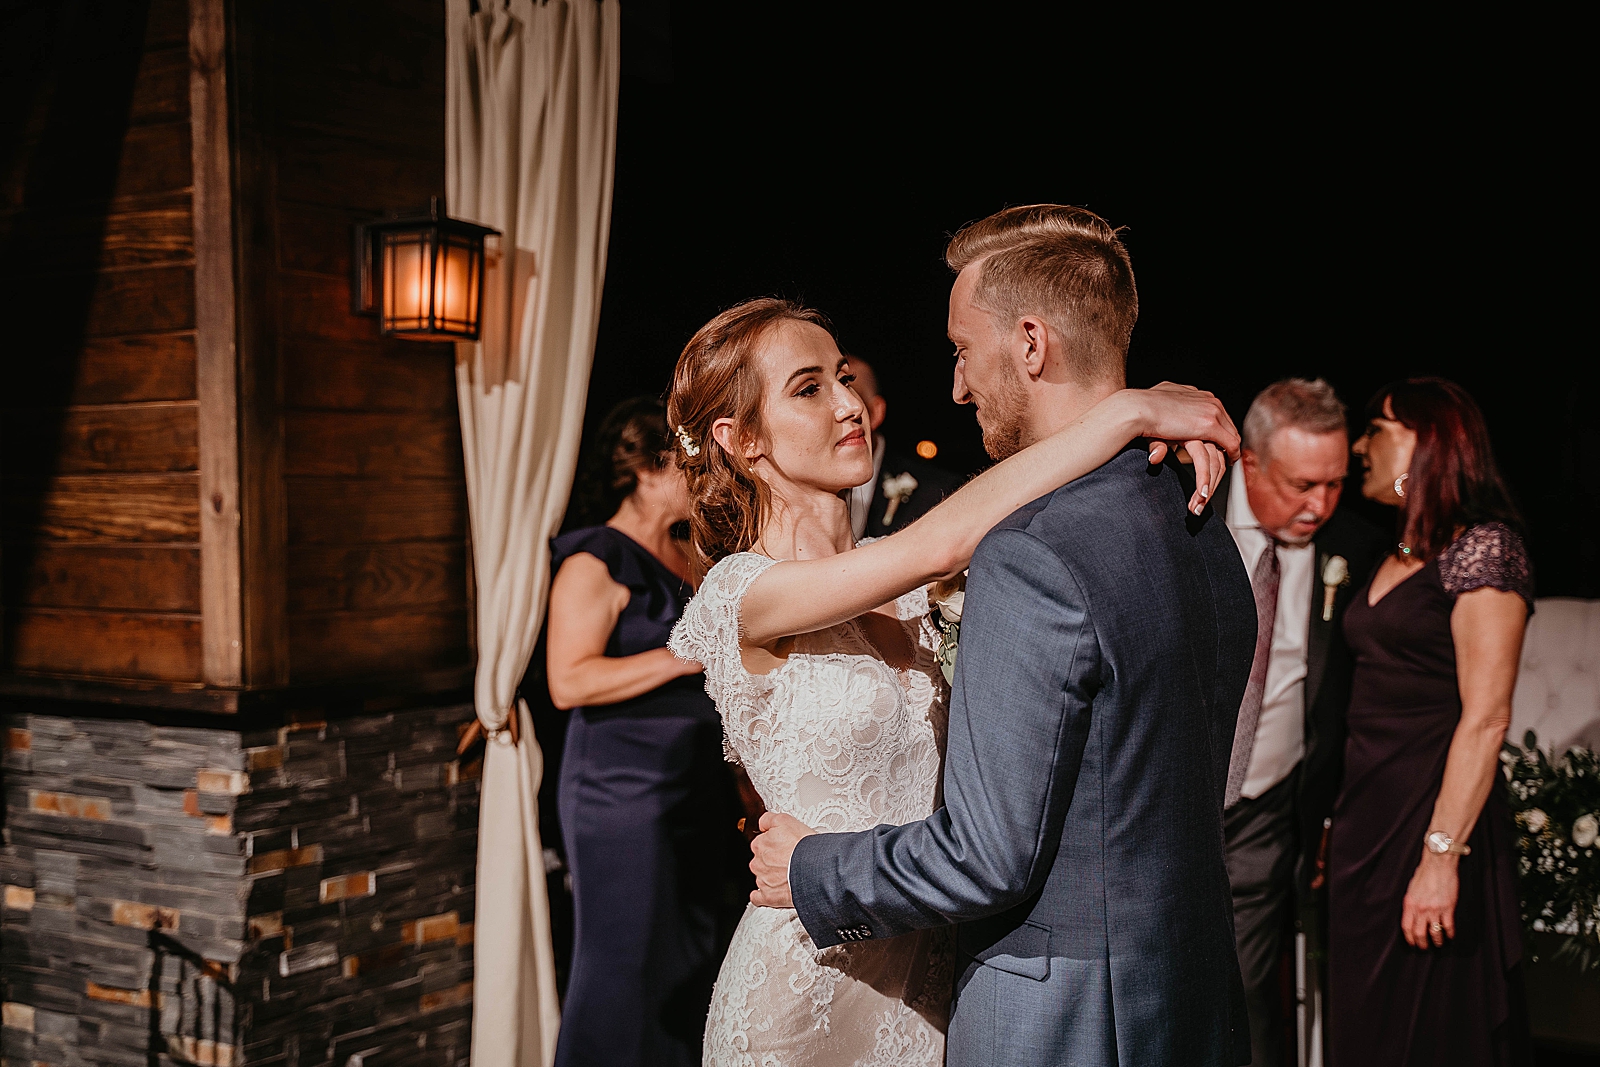 Bride and Groom First dance dimly lit lighting Living Sculptures Sanctuary Wedding Photography captured by South Florida Wedding Photographer Krystal Capone Photography 